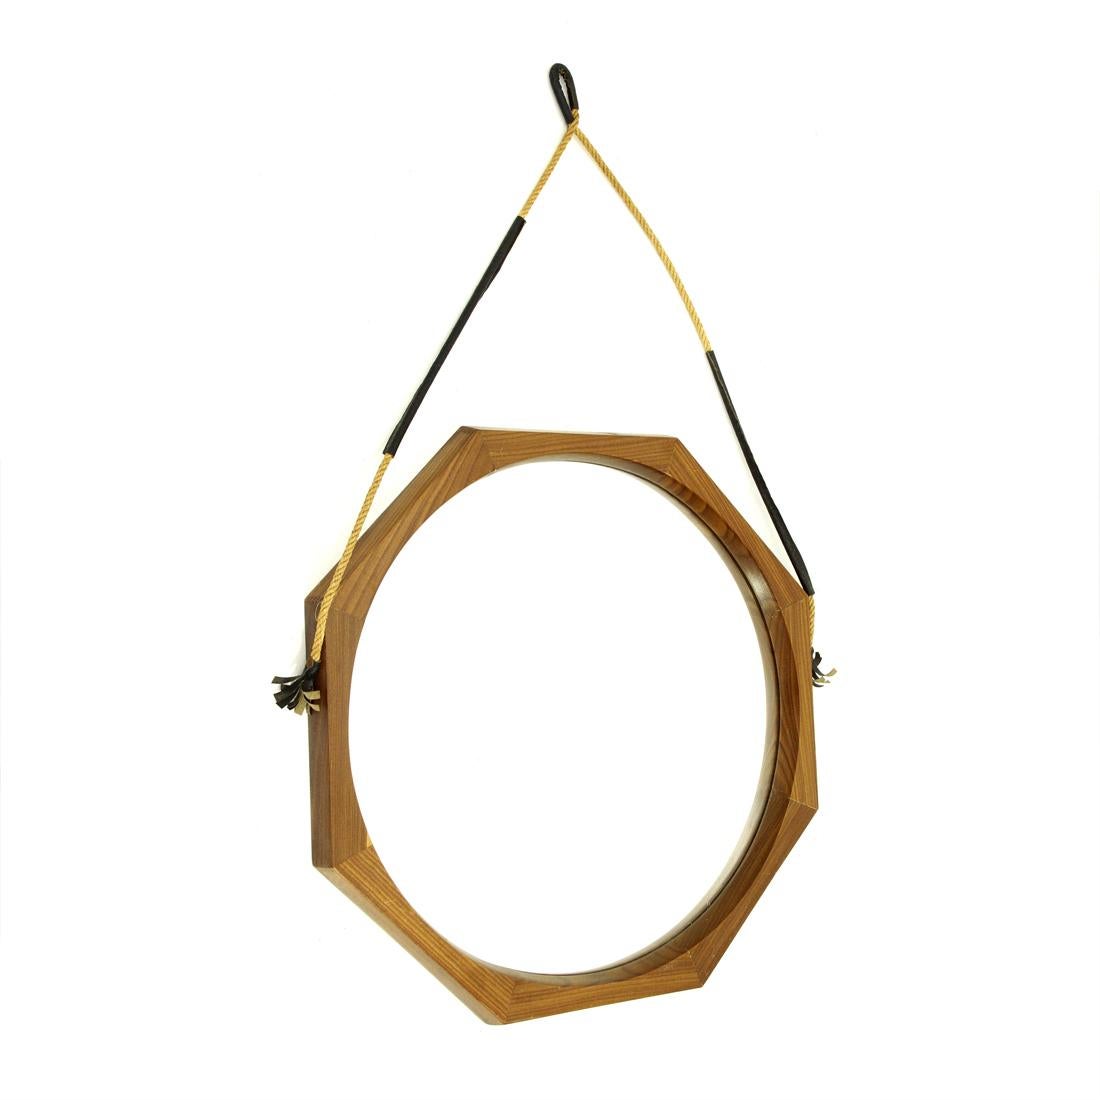 Italian manufacturing mirror produced in the 1960s.
Teak frame with faceted edges.
Circular mirror.
Rope strap with leather details.
Good general conditions, some signs due to normal use over time.

Dimensions: Diameter 55 cm - Depth 4 cm